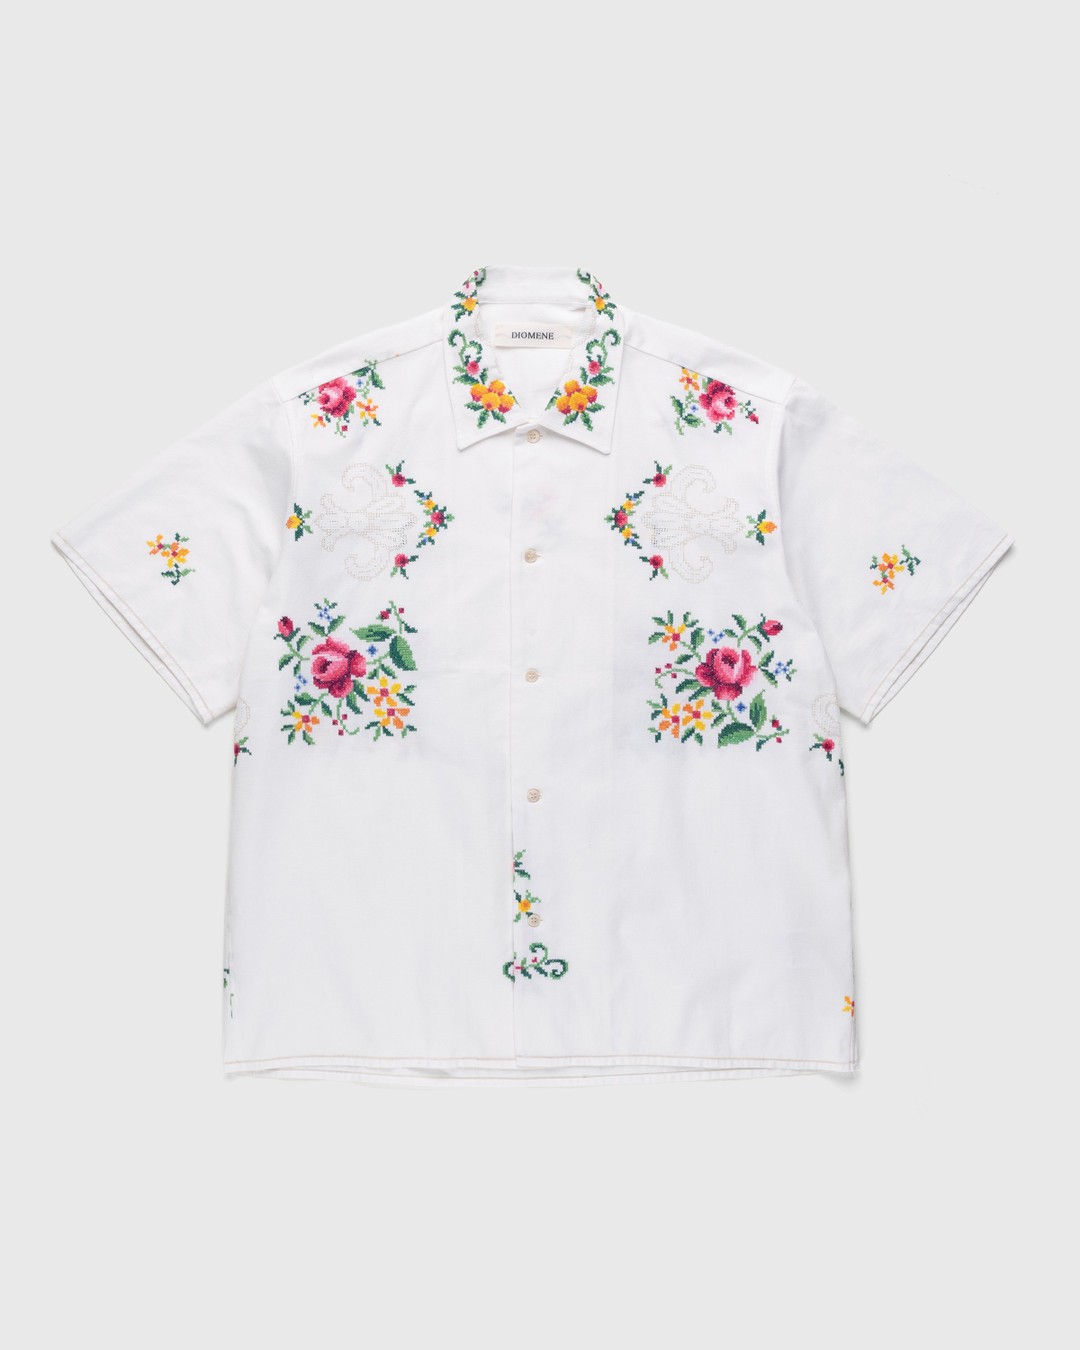 Diomene by Damir Doma – Embroidered Vacation Shirt White/Green - Shortsleeve Shirts - White - Image 1